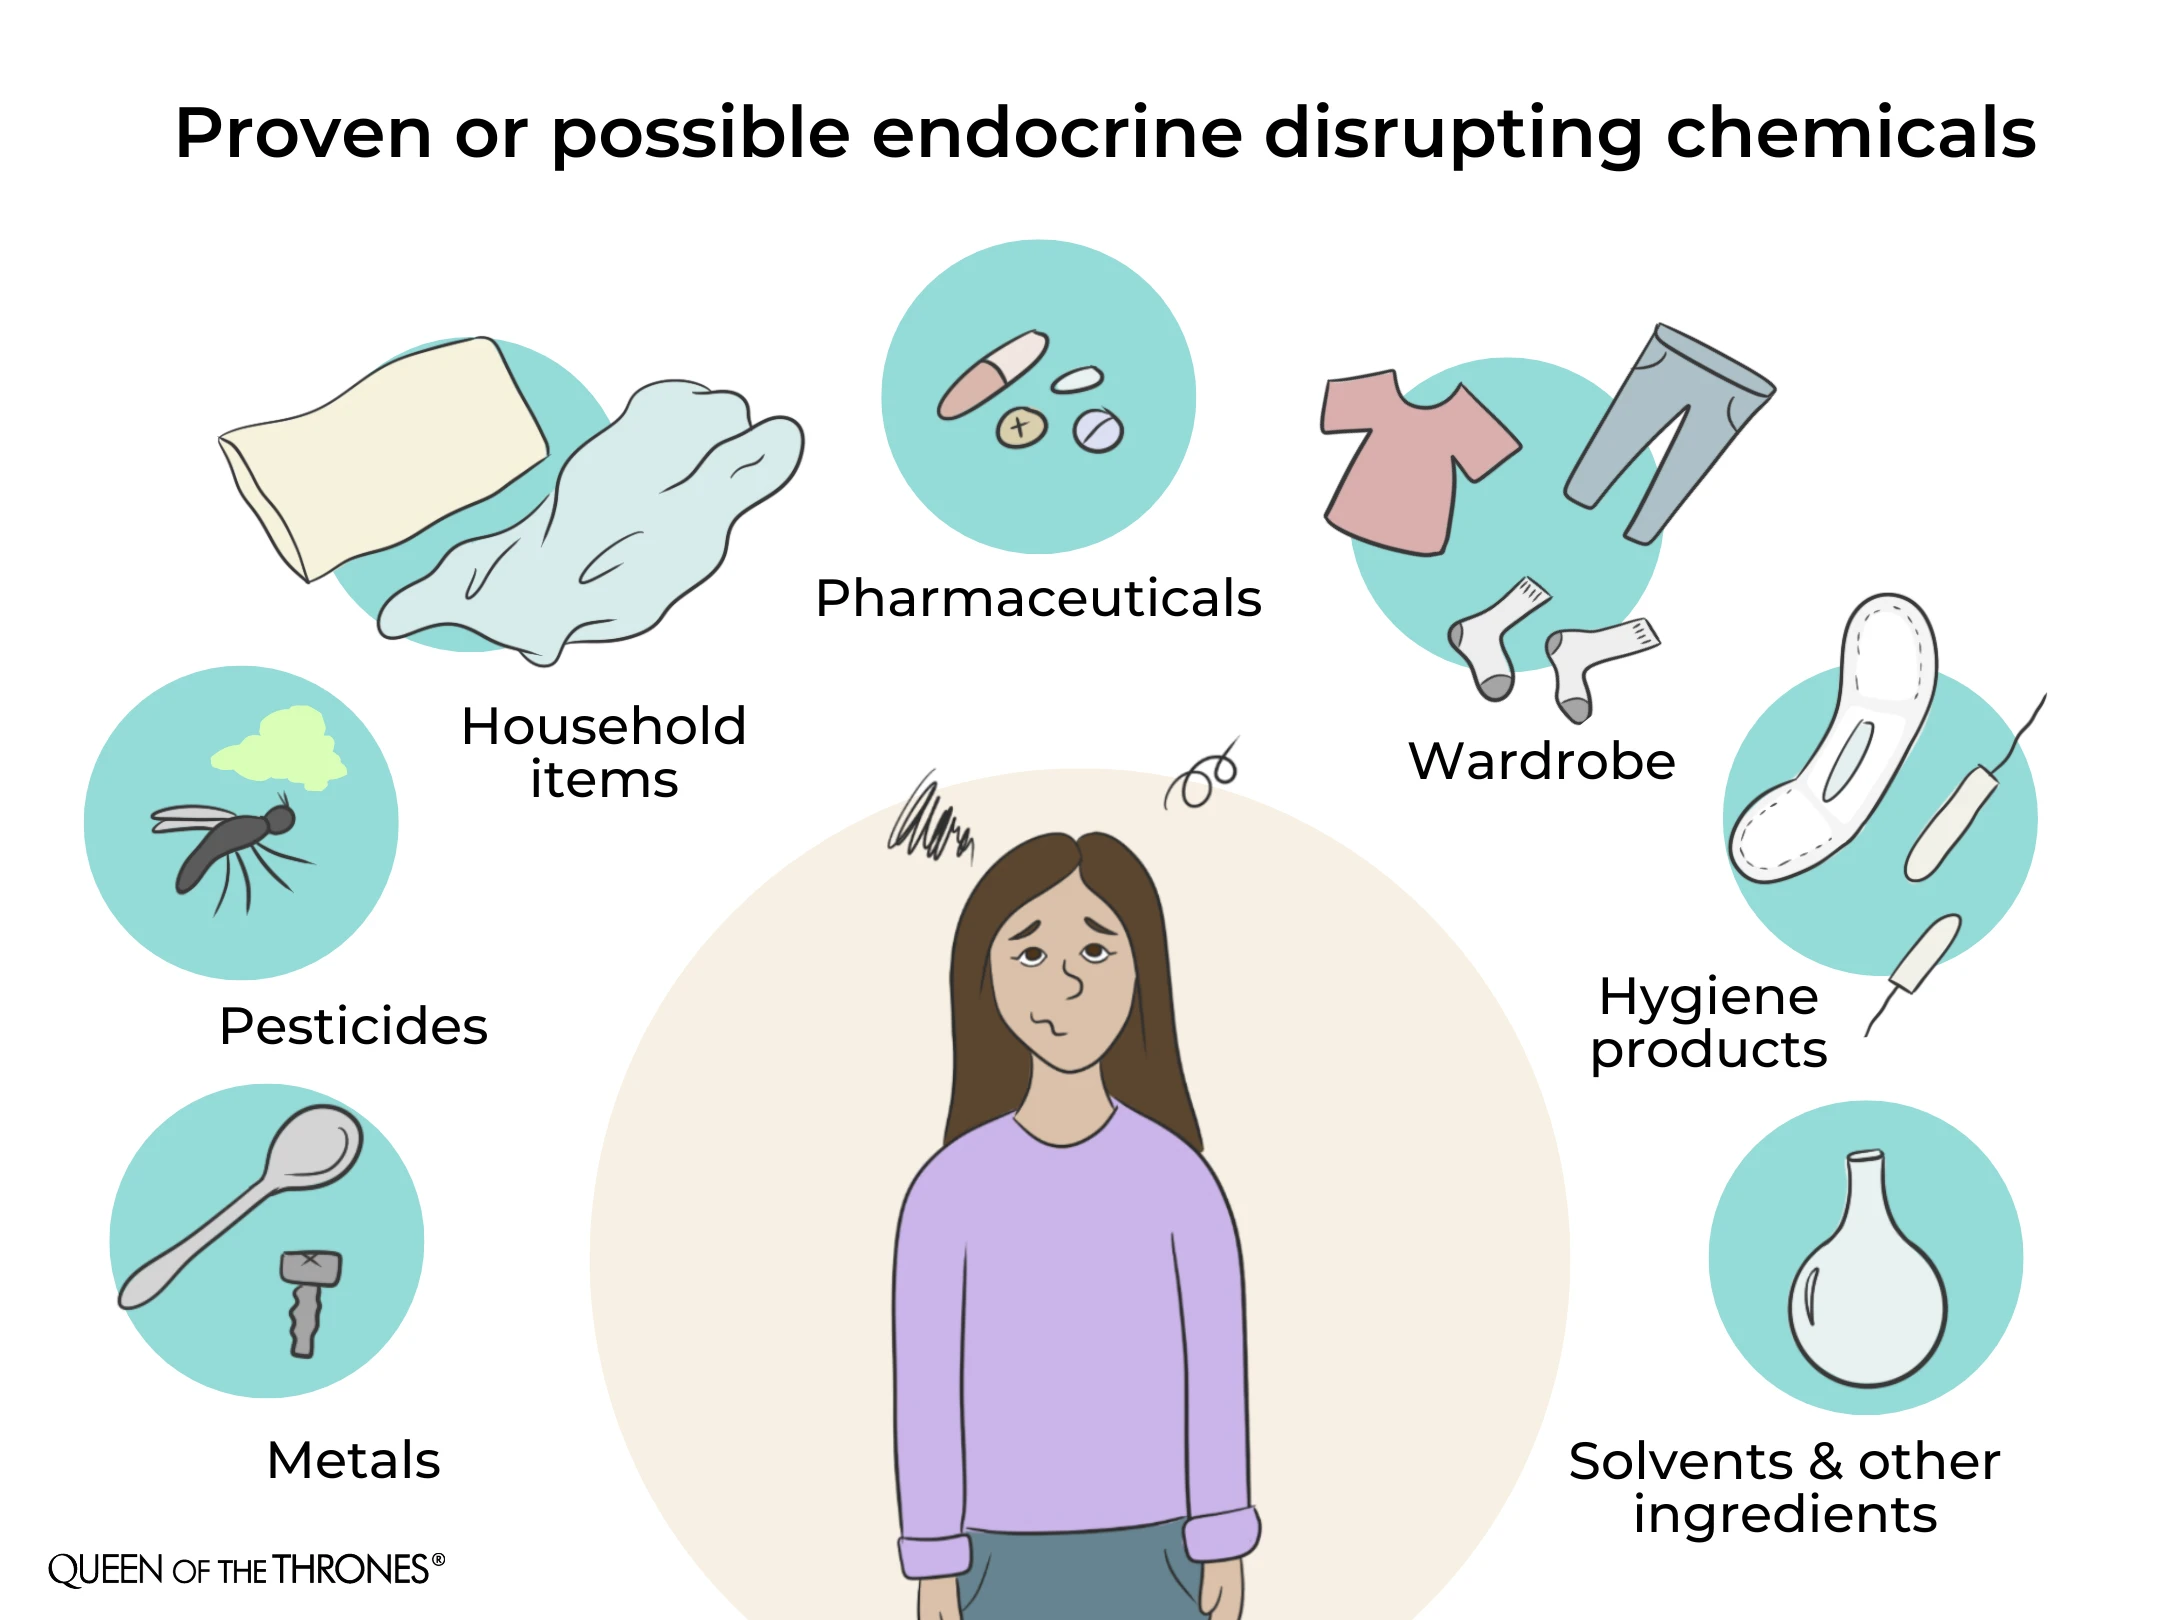 Queen of the Thrones explains what are endocrine disruptors